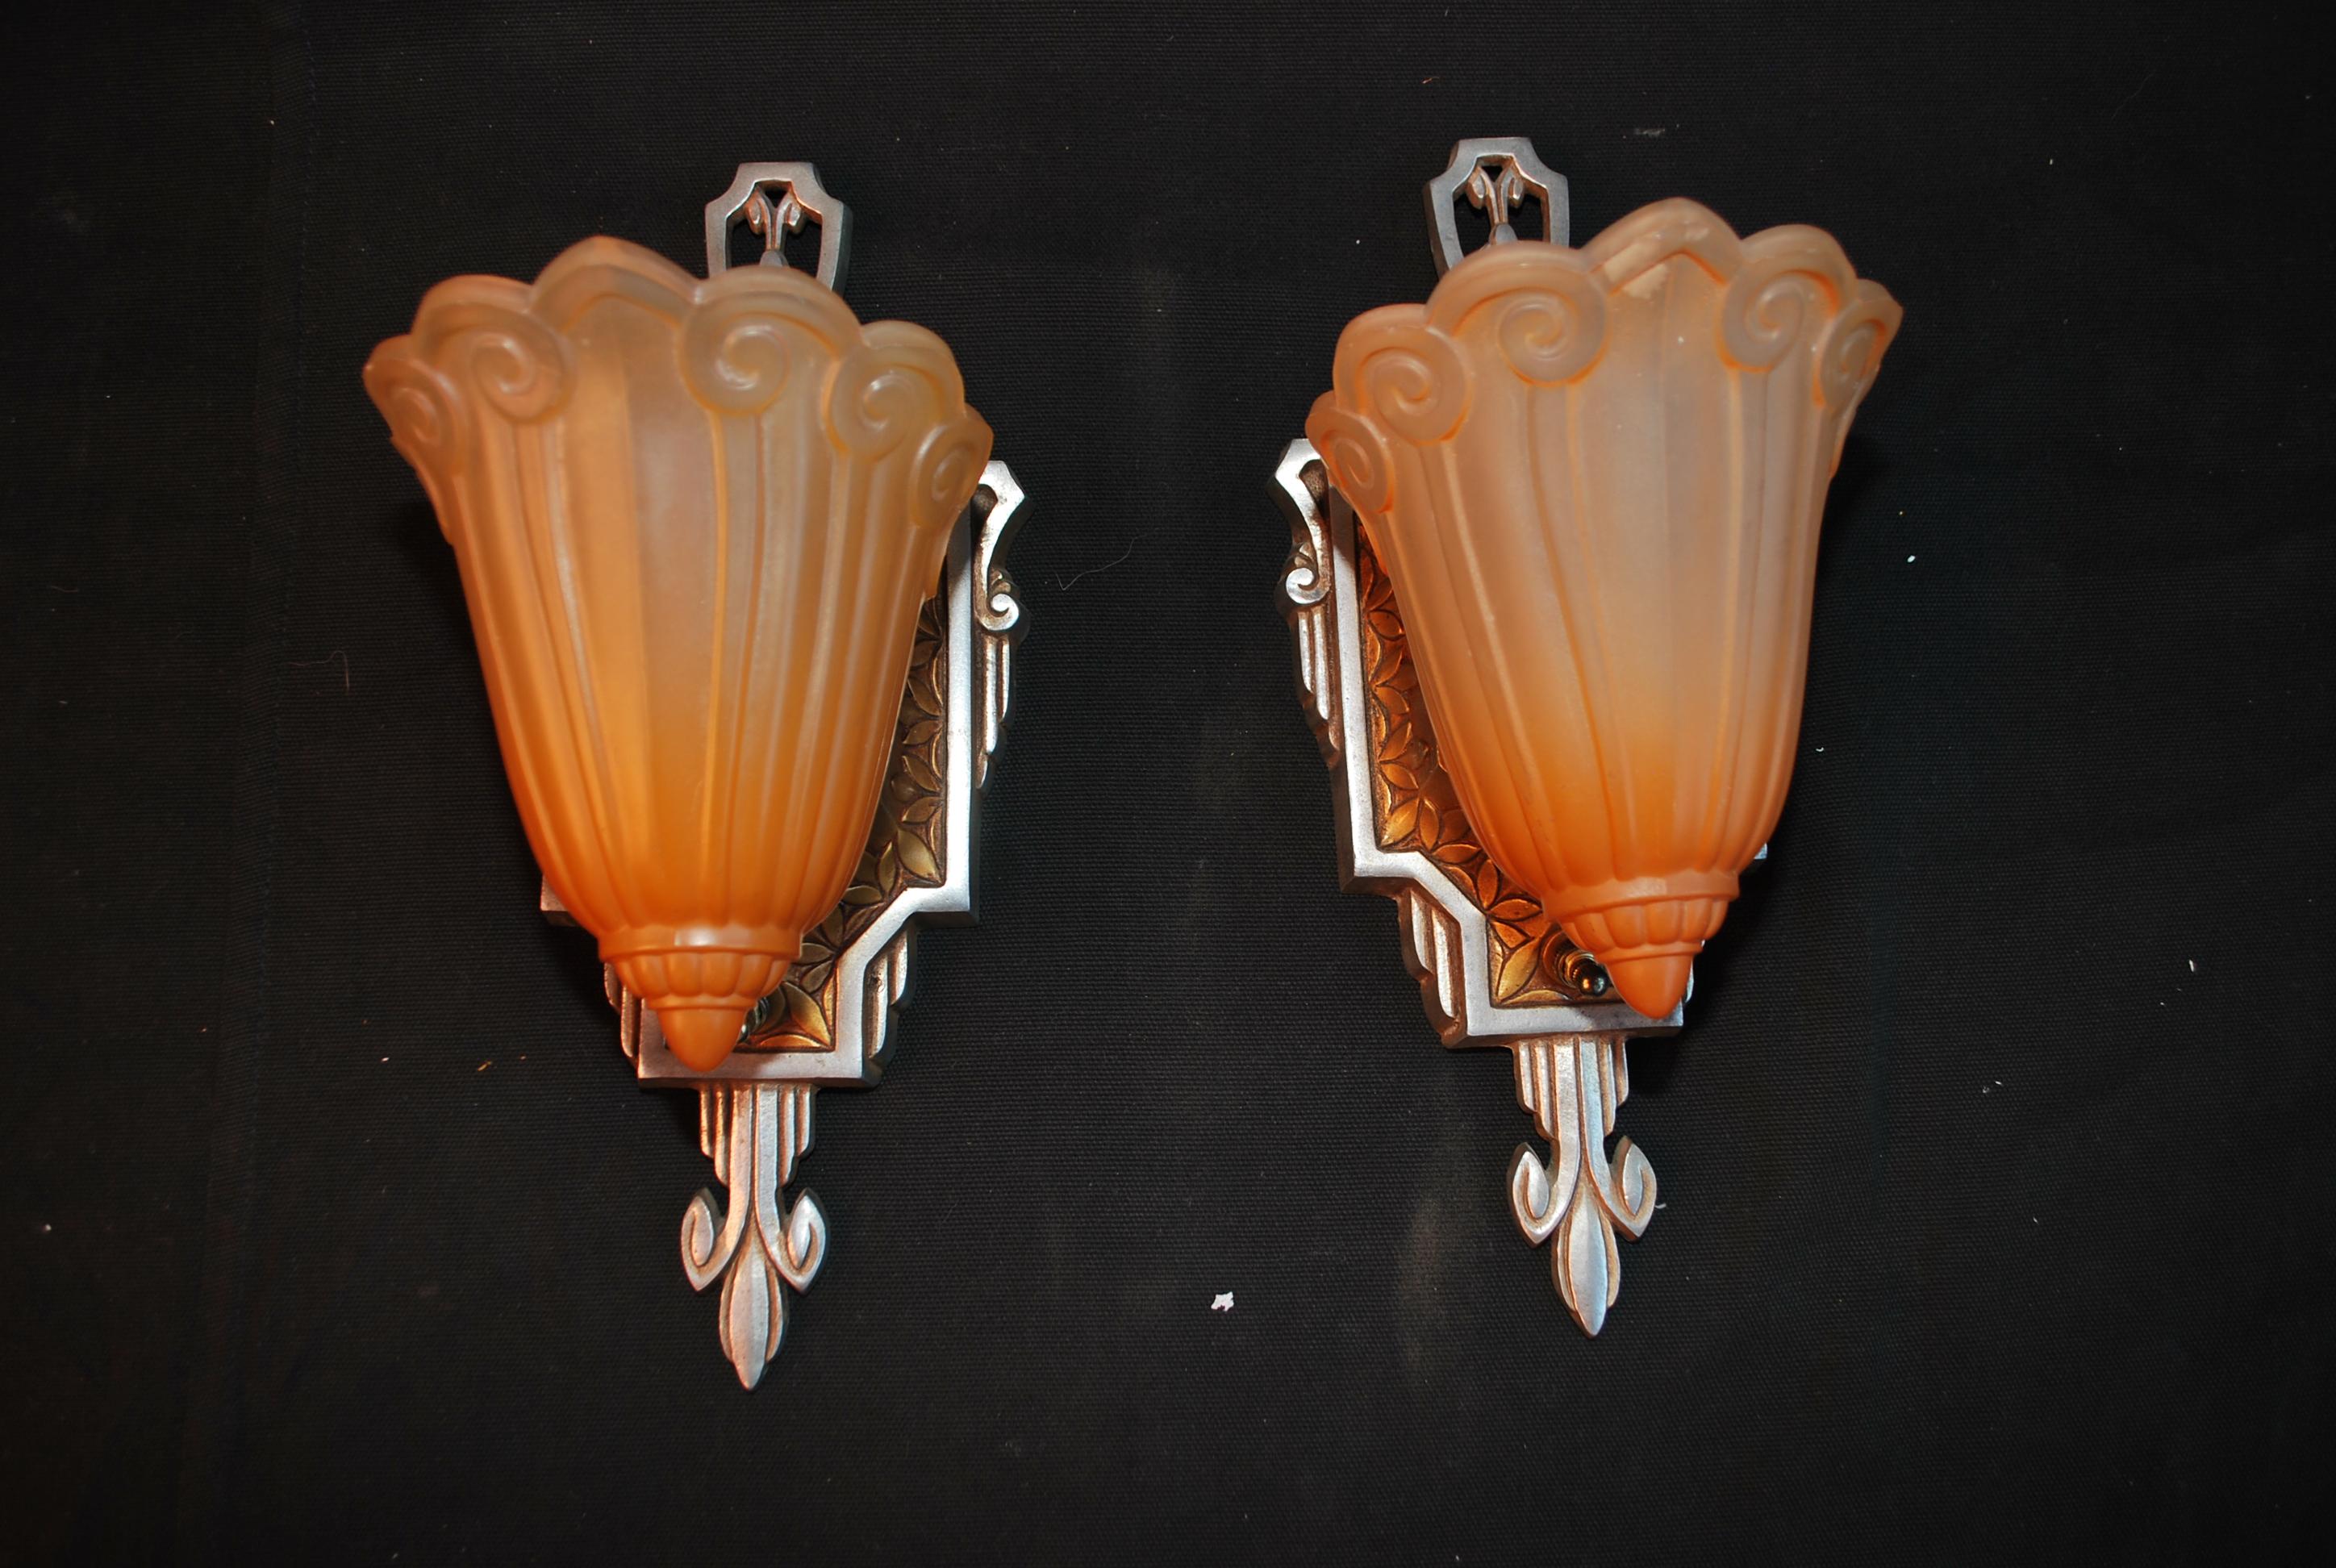  A beautiful and elegant pair of 1920's sconces, the patina is allot nicer in person